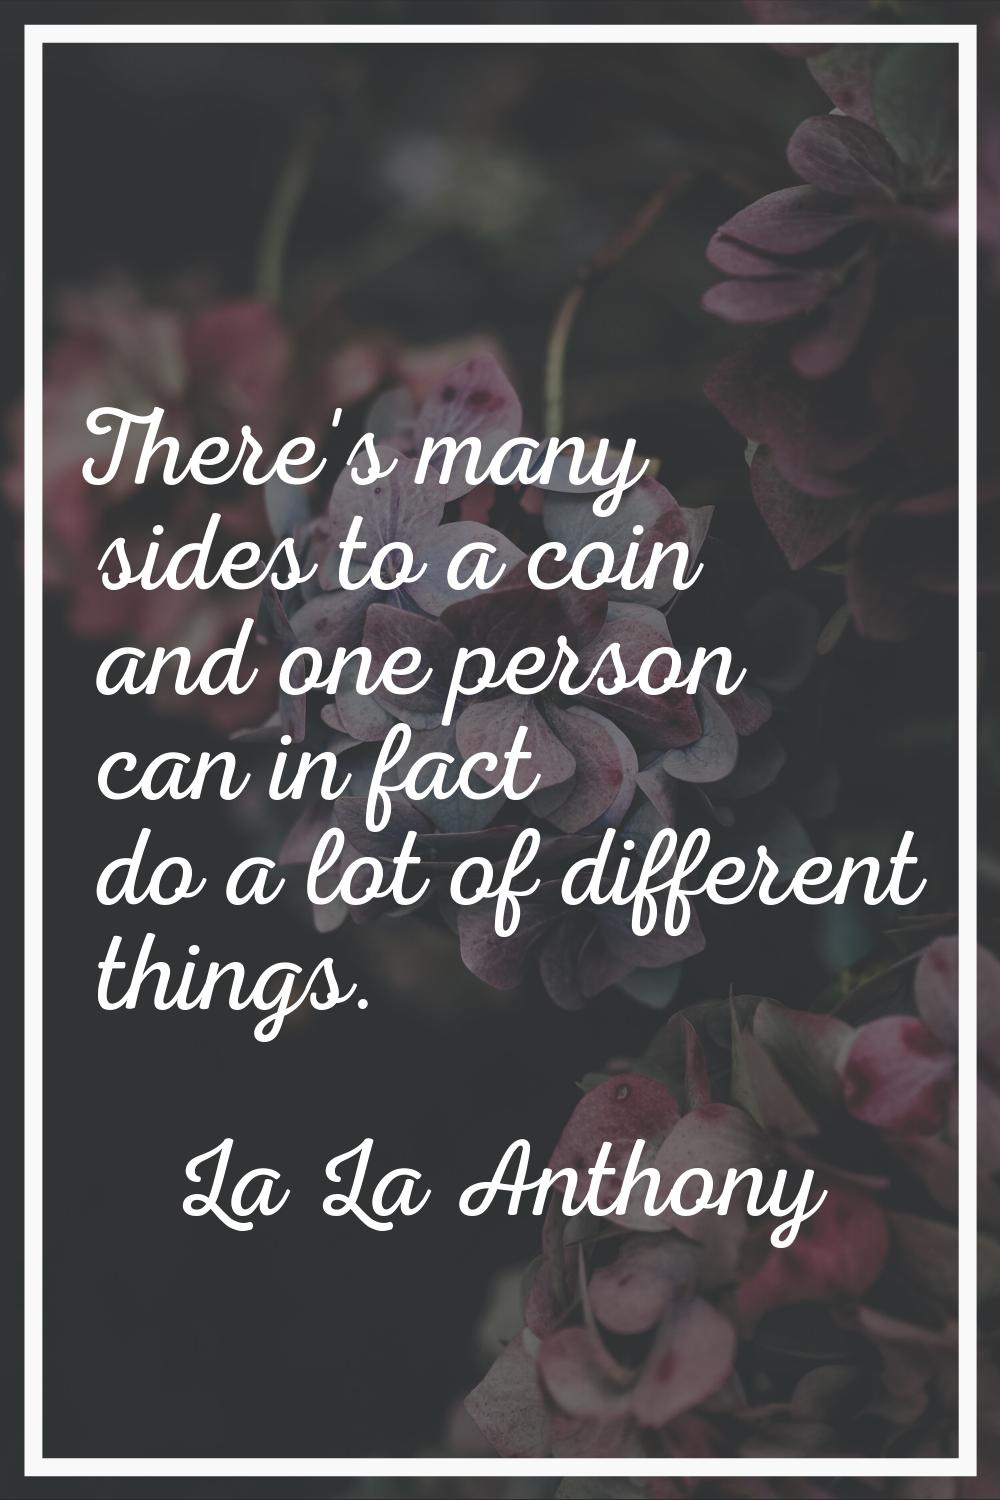 There's many sides to a coin and one person can in fact do a lot of different things.